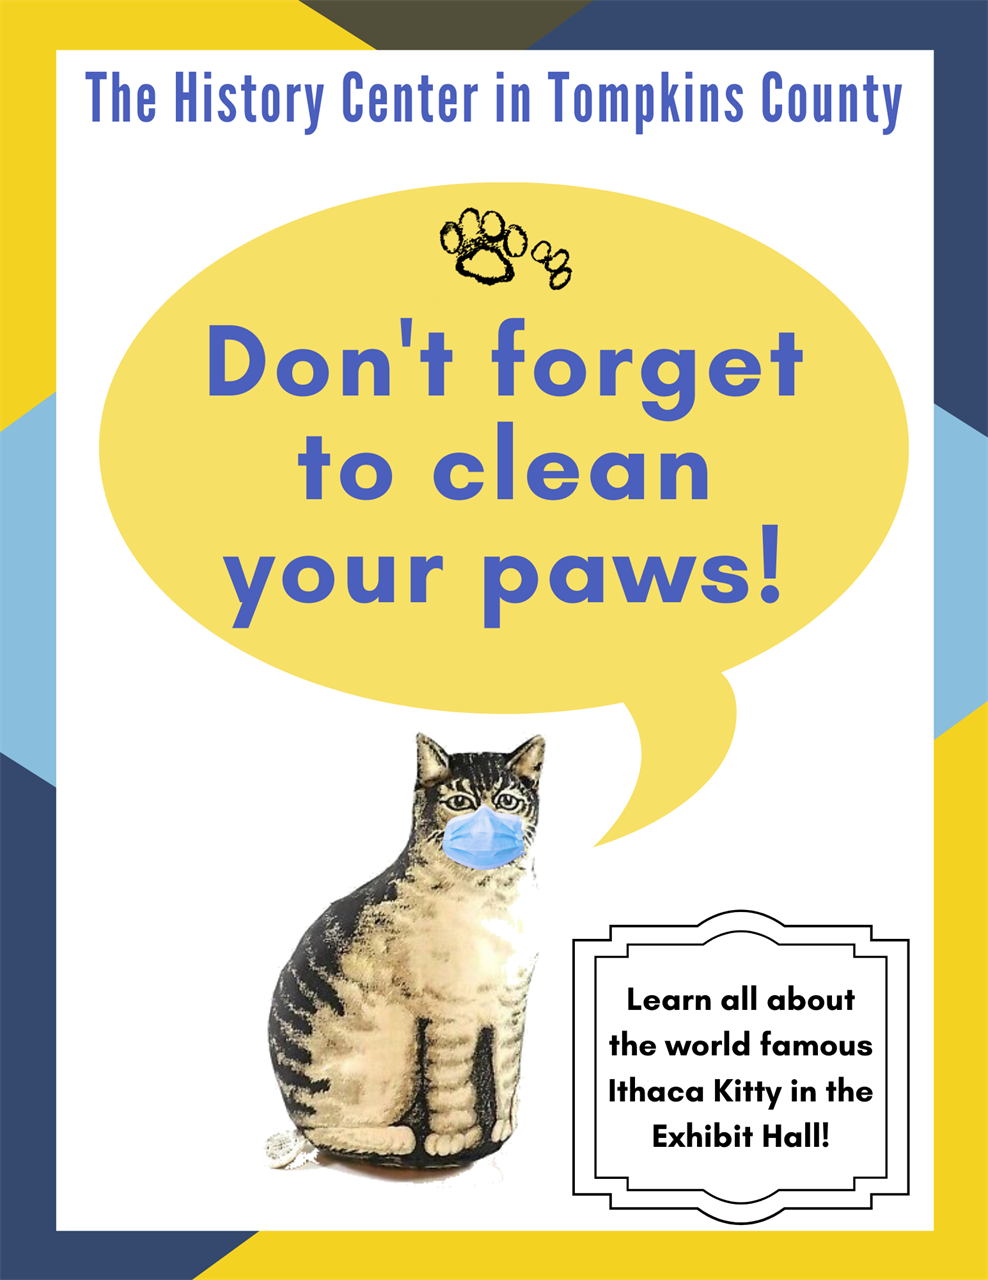 An image with the header "The History Center in Tompkins County" and features a masked Ithaca Kitty saying "Don't forget to clean your paws!" The caption reads "Learn all about the world famous Ithaca Kitty in the Exhibit Hall!"